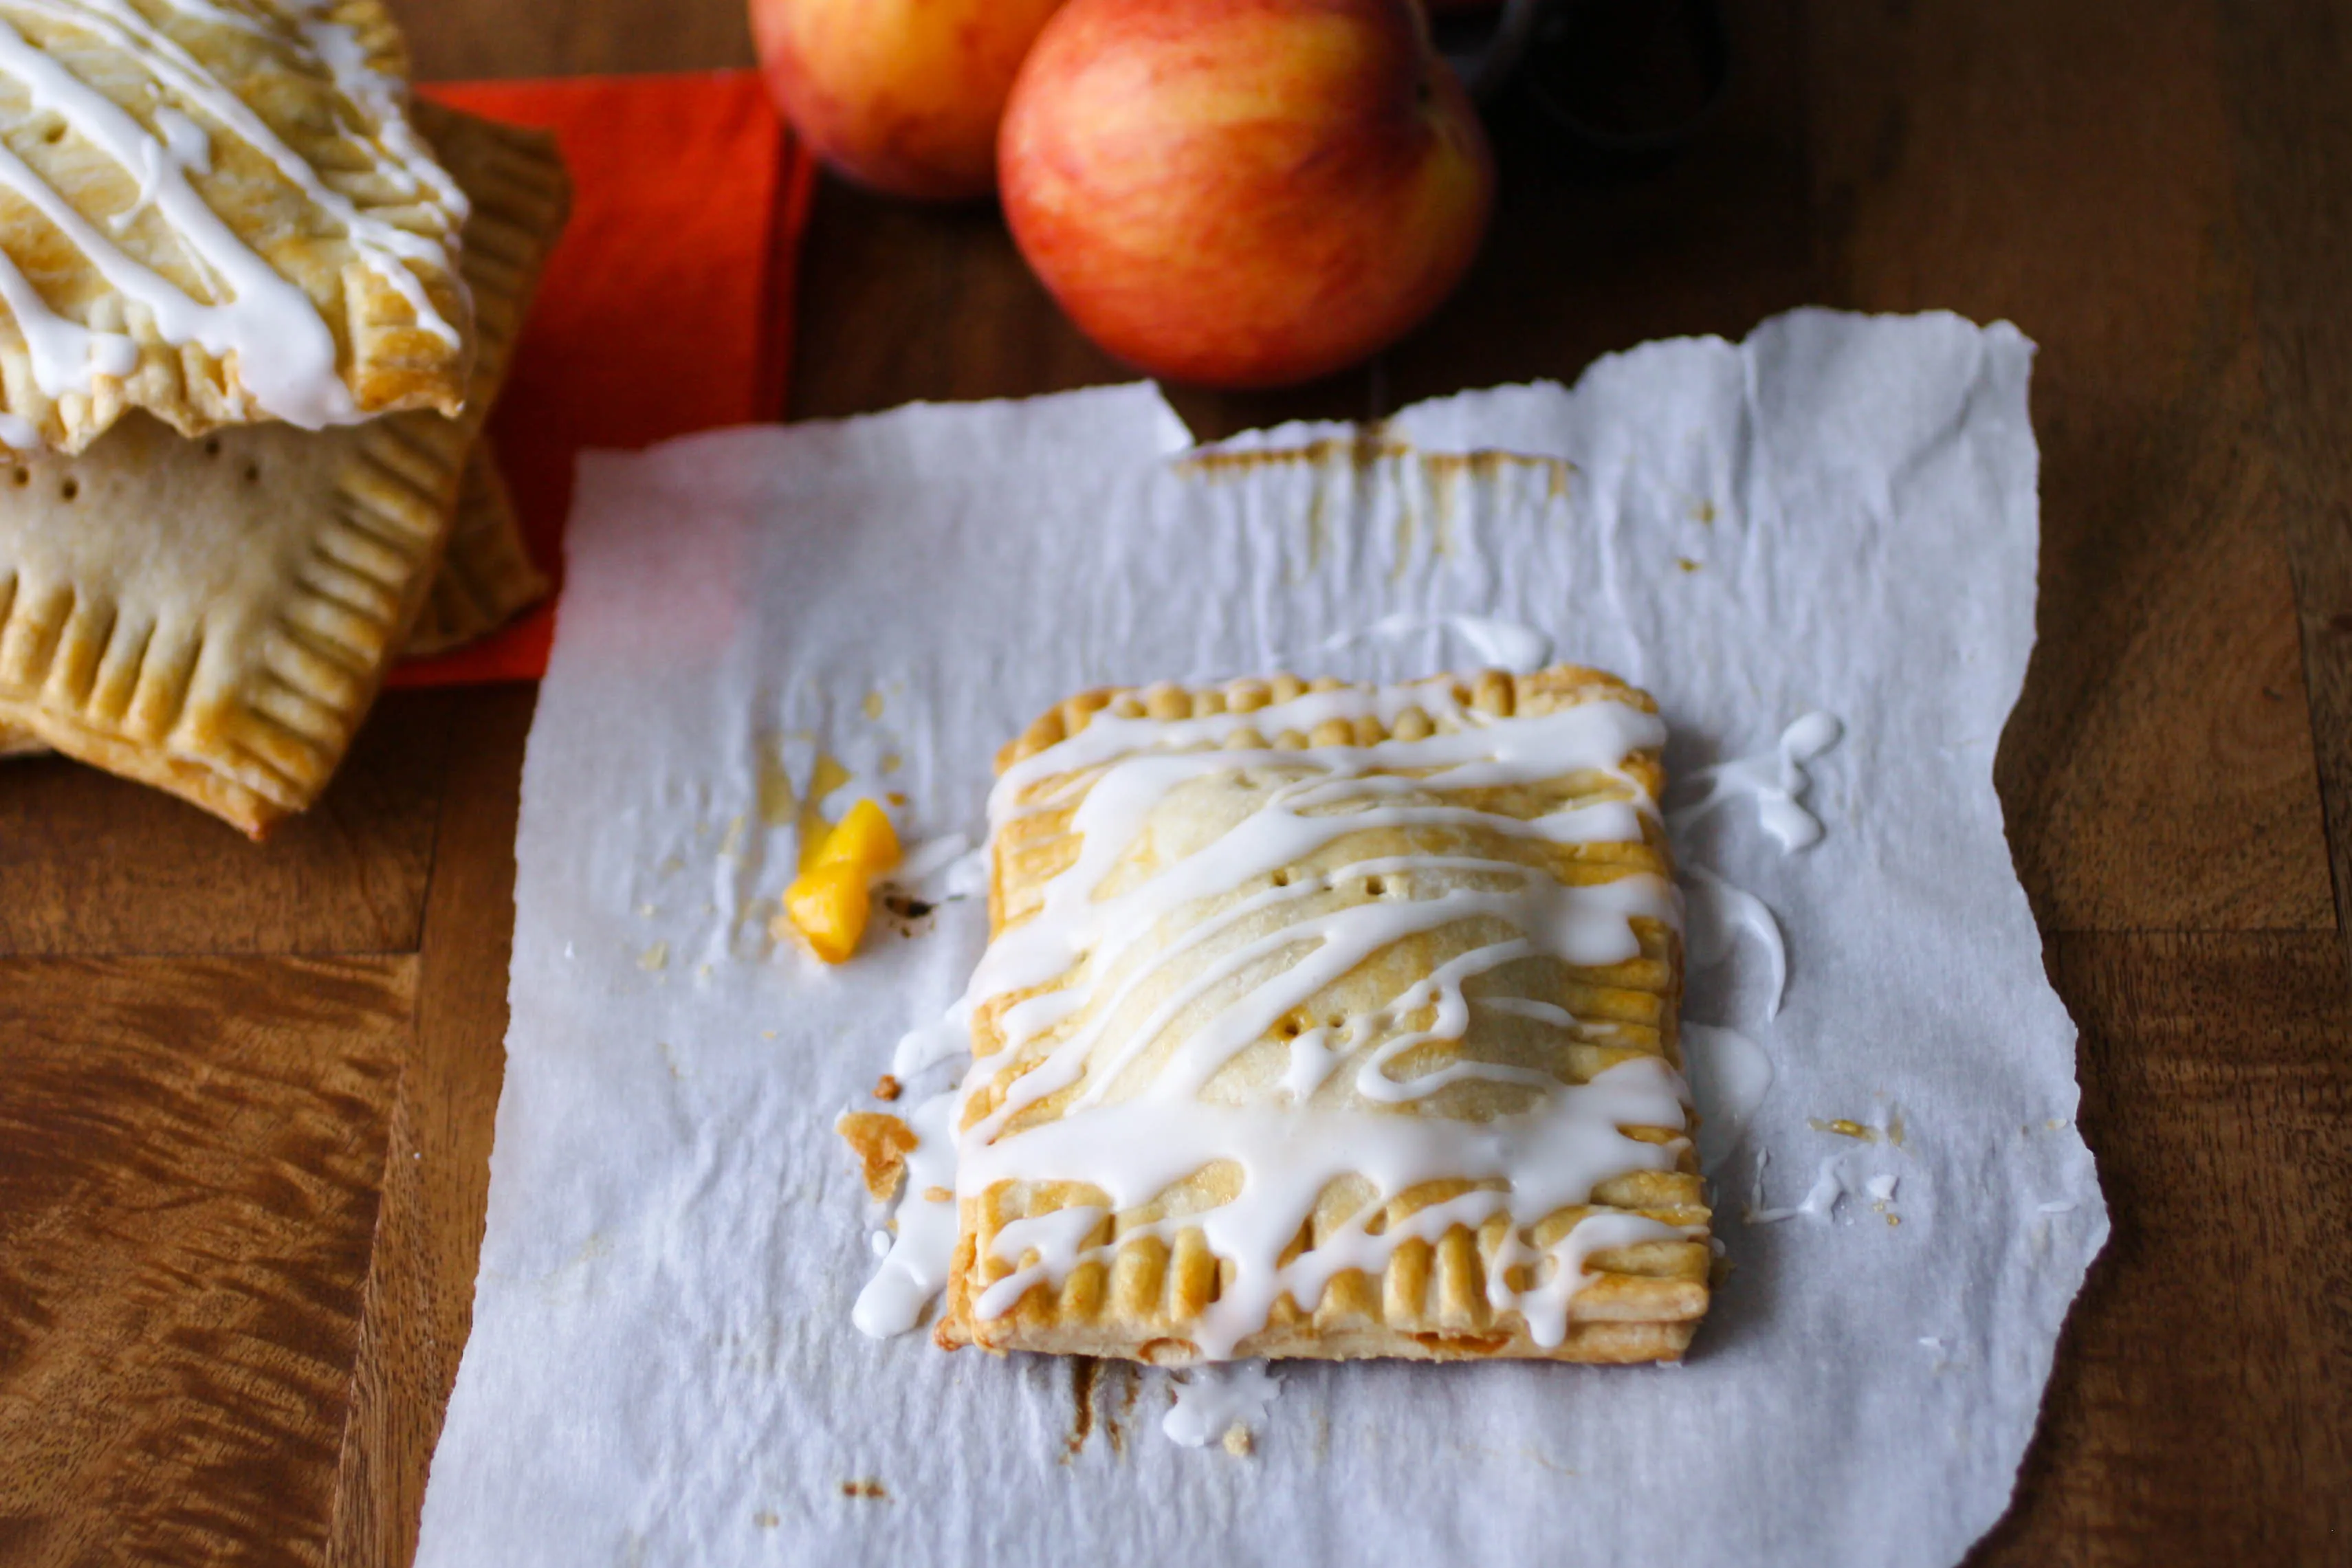 Fresh Peach Pie “Pop Tarts” are flaky on the outside, and filled with fresh peaches. You'll love them!